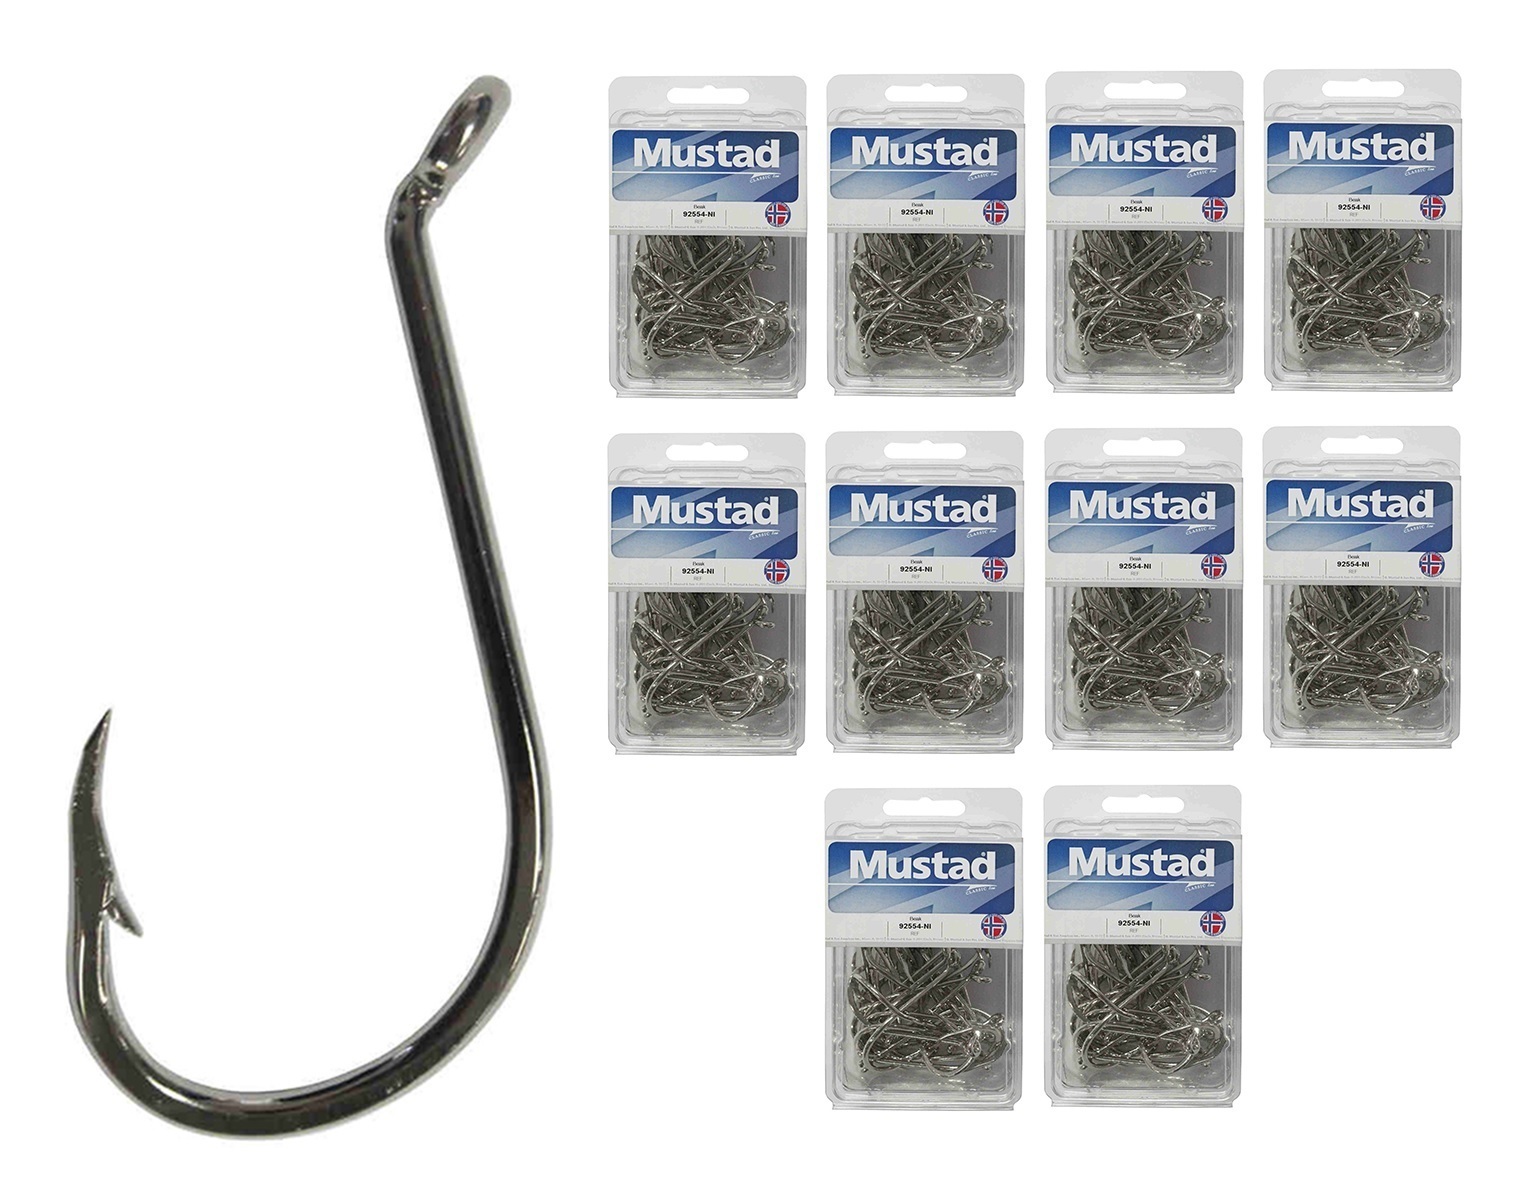 10 Boxes of 92554 2x Strong Nickle Plated Octopus Fishing Hooks - Size 4/0